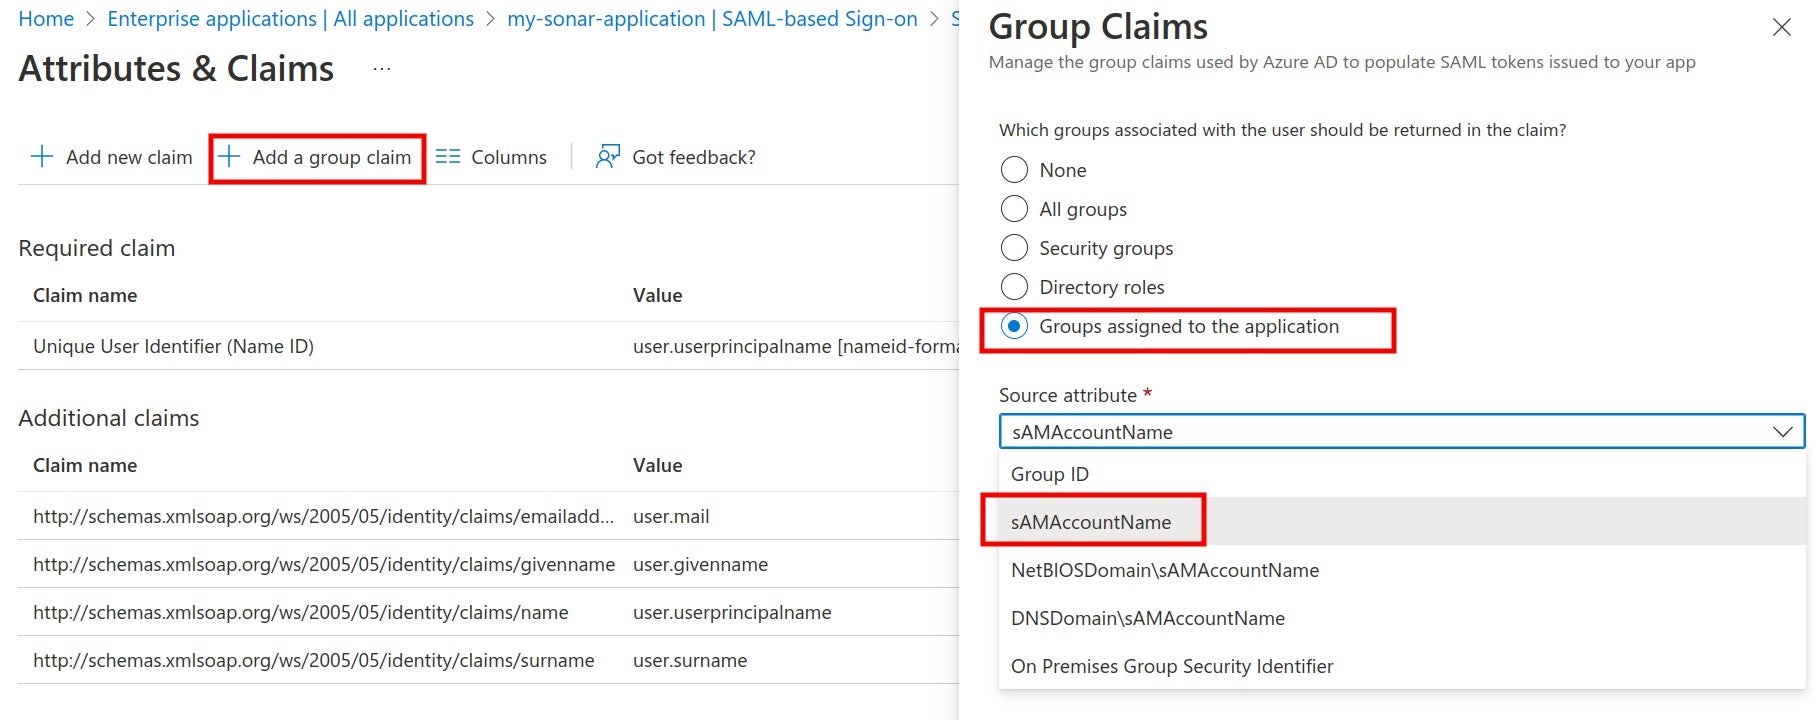 Where to map your SAML groups in Azure before you can add a group claim.